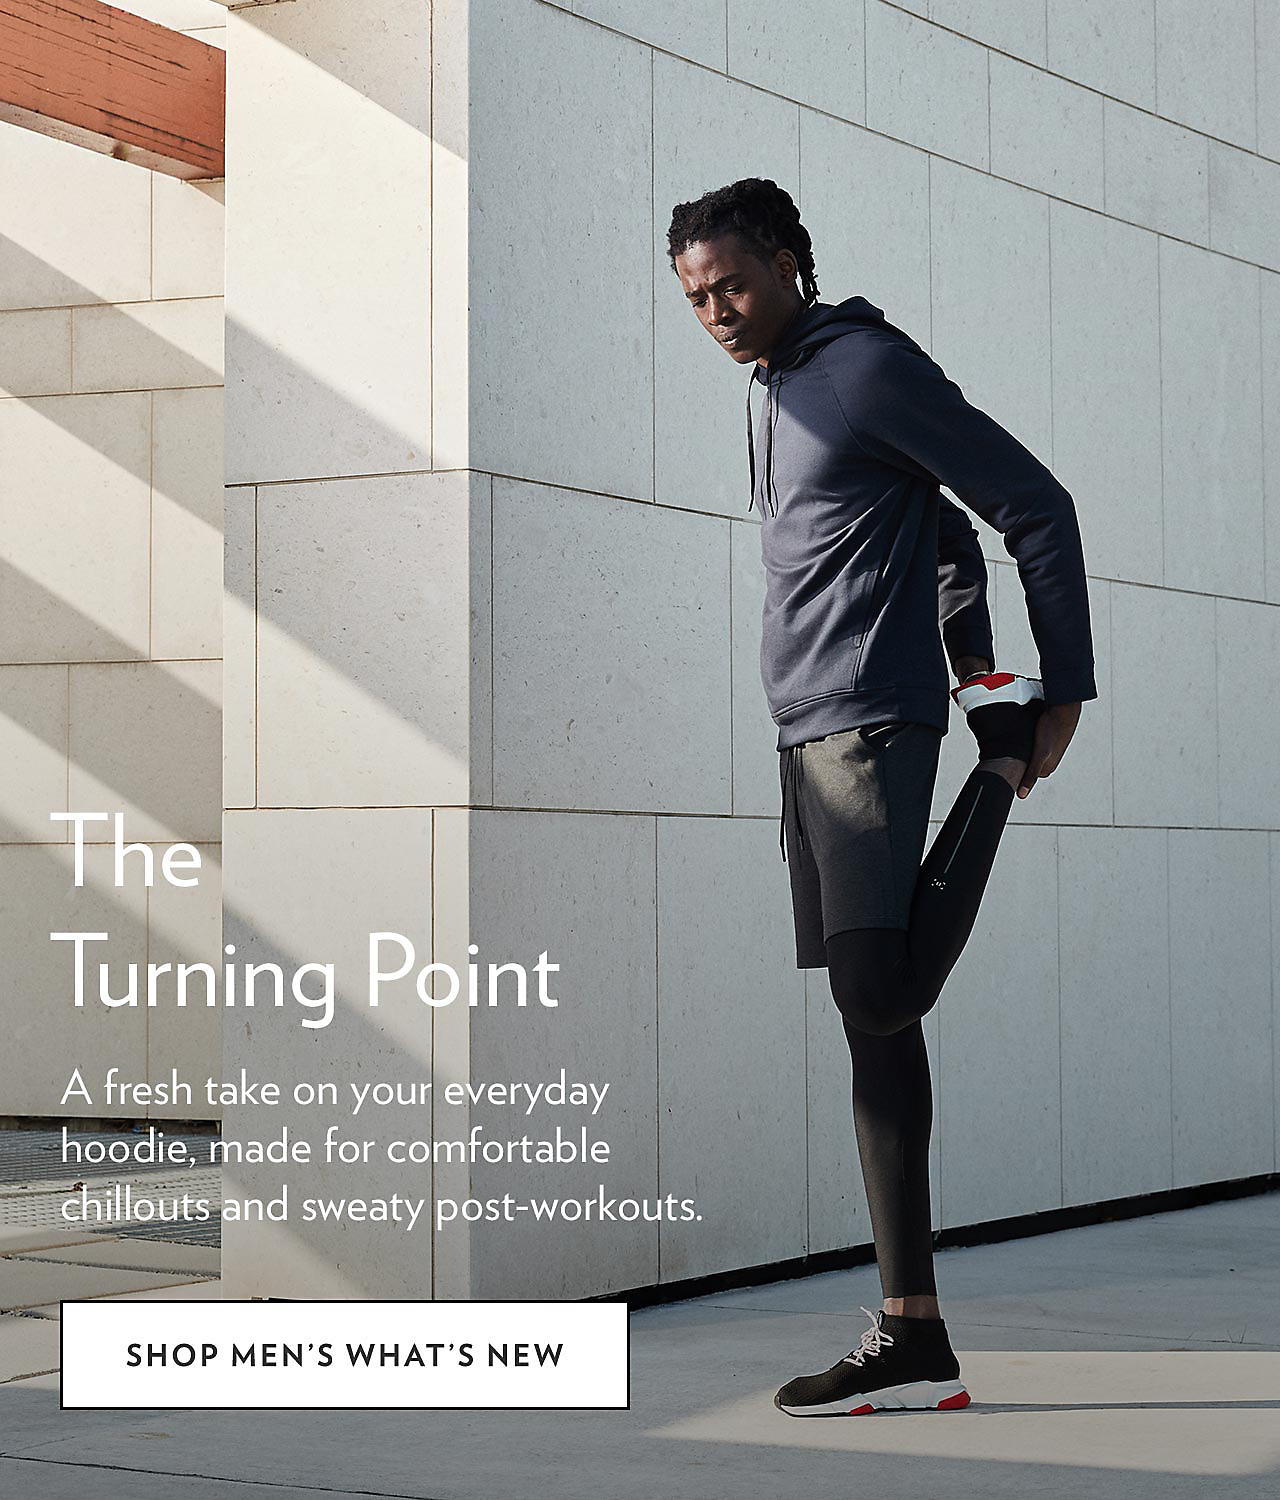 The Turning Point - SHOP MEN'S WHAT'S NEW